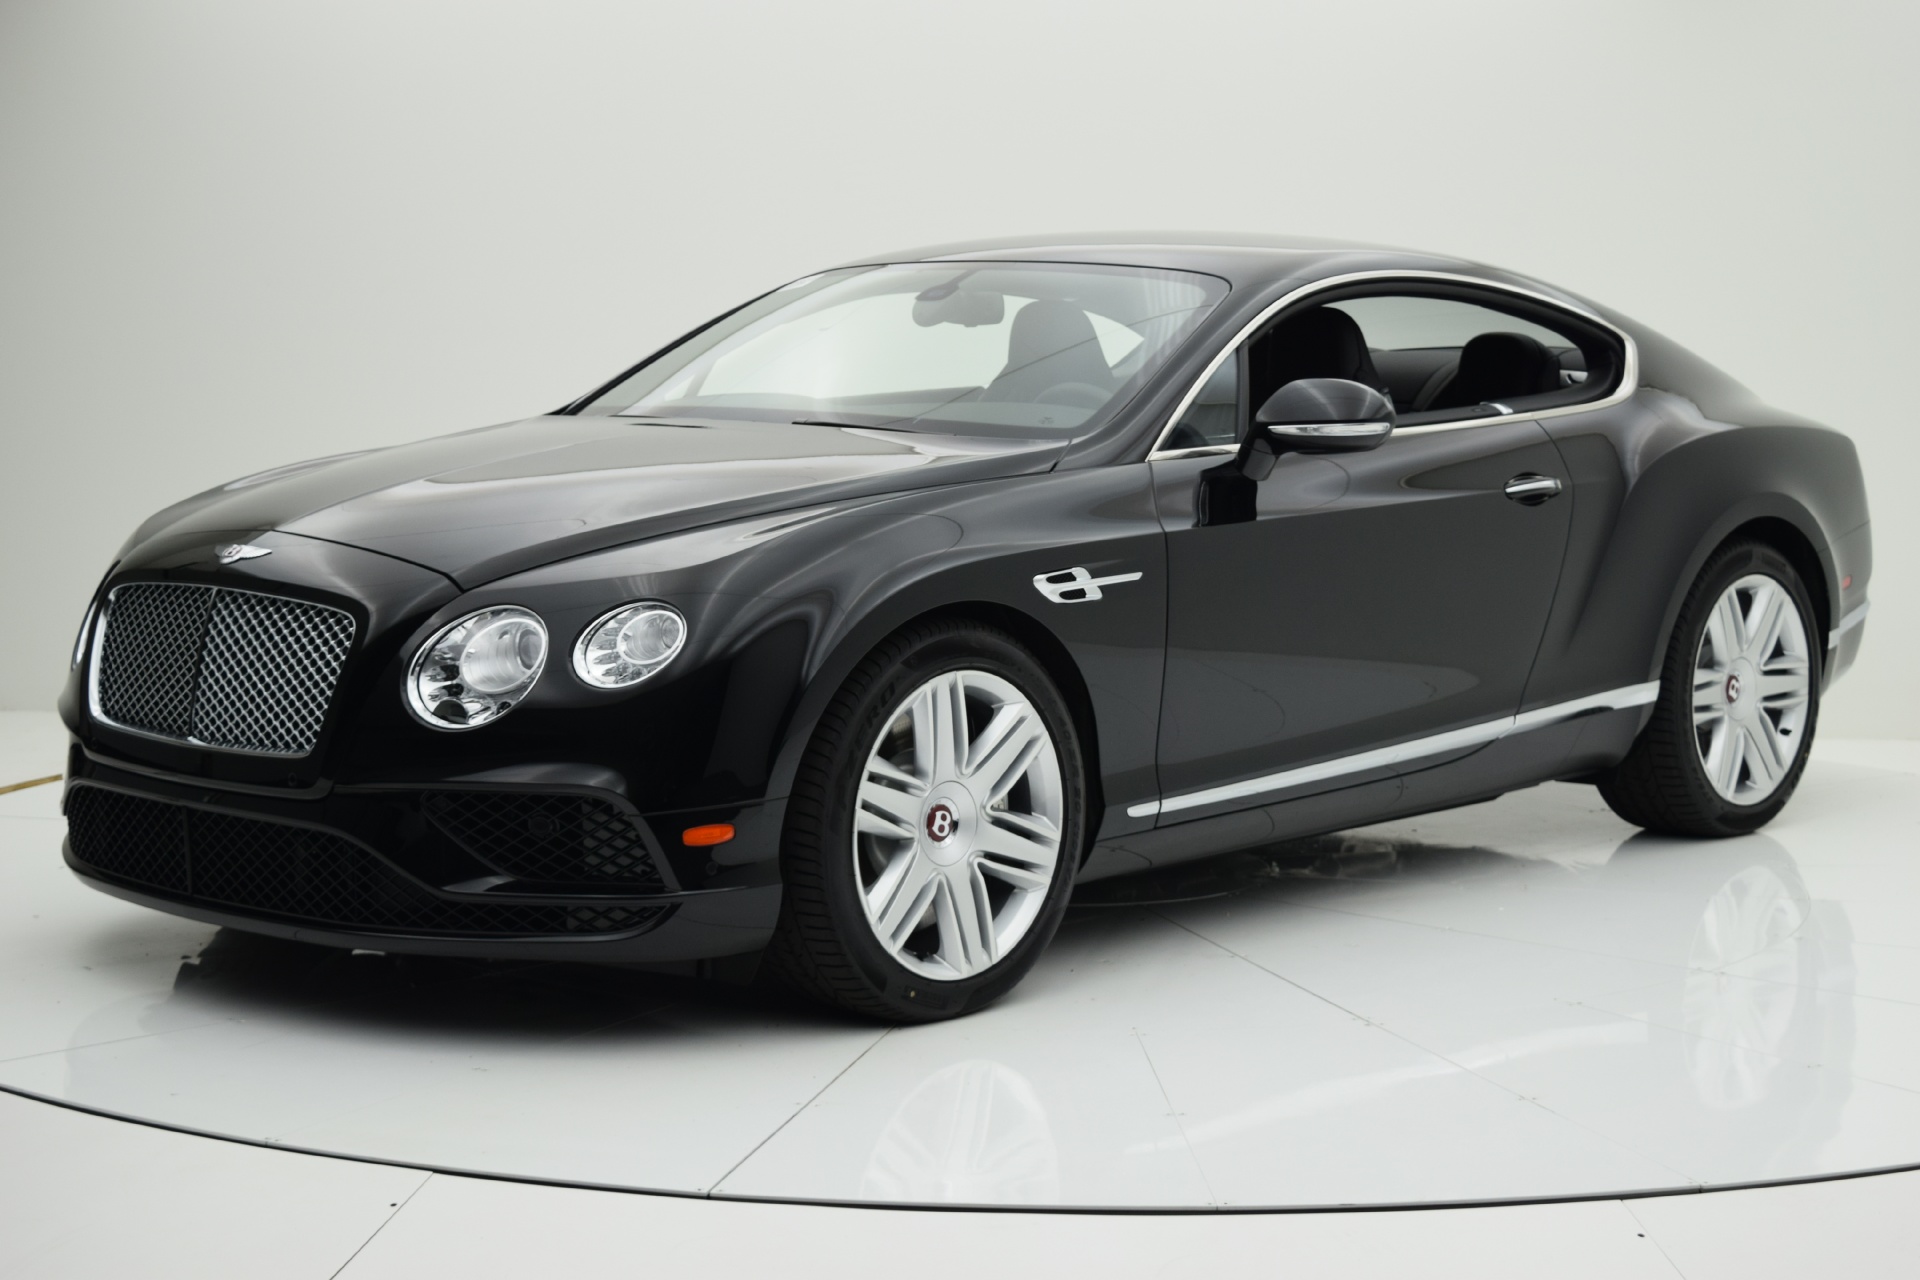 New 2016 Bentley Continental GT V8 Coupe for sale Sold at Bentley Palmyra N.J. in Palmyra NJ 08065 2